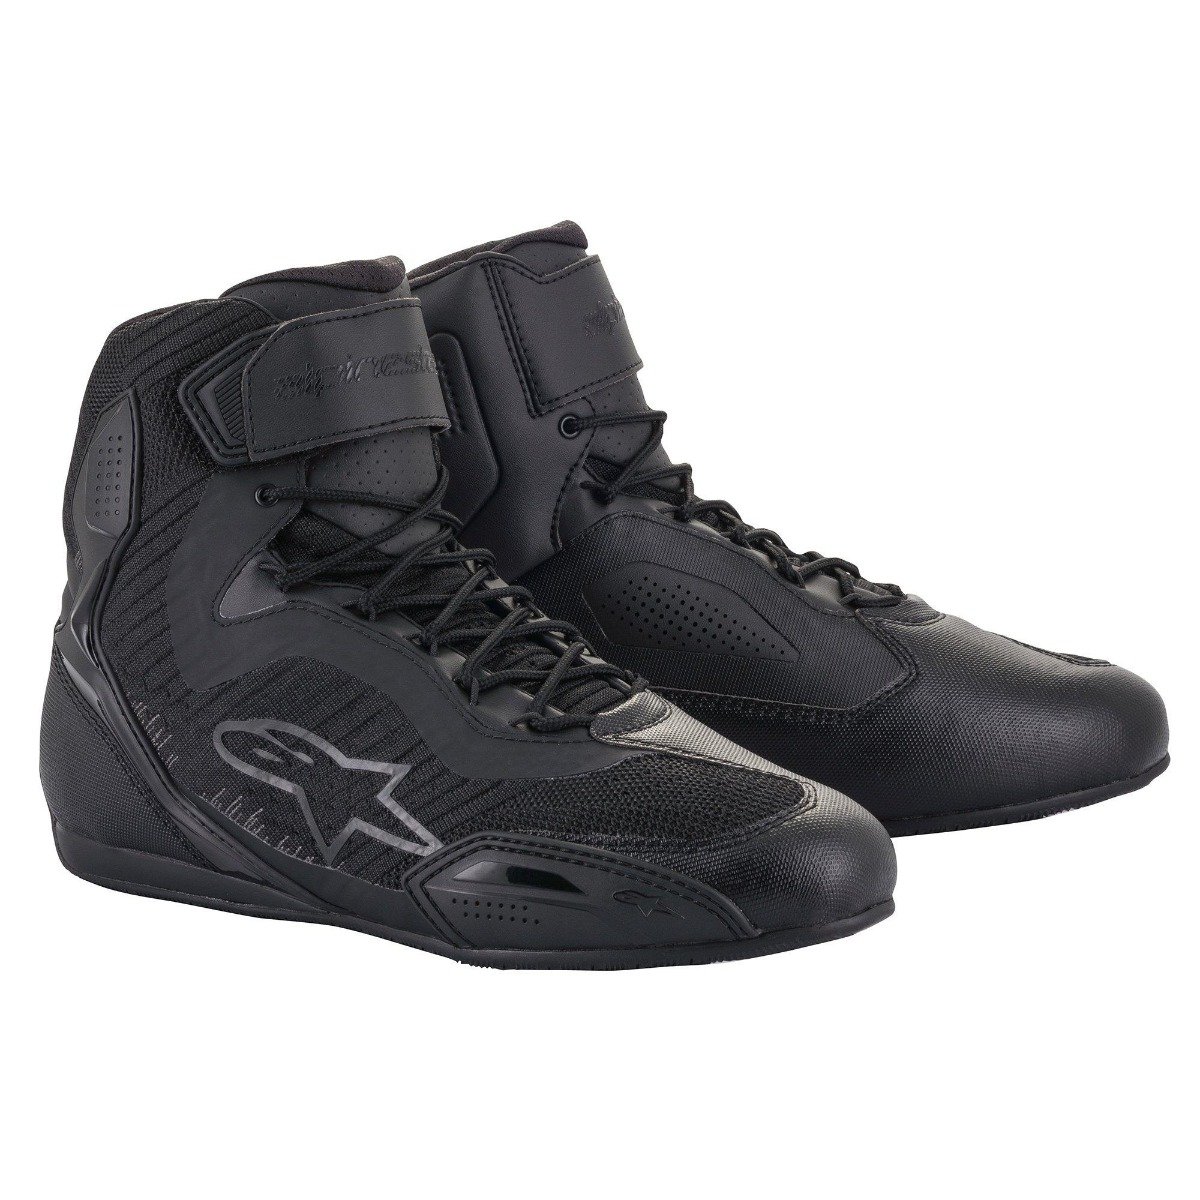 Image of Alpinestars Stella Faster-3 Rideknit Noir Anthracite Chaussures Taille US 7